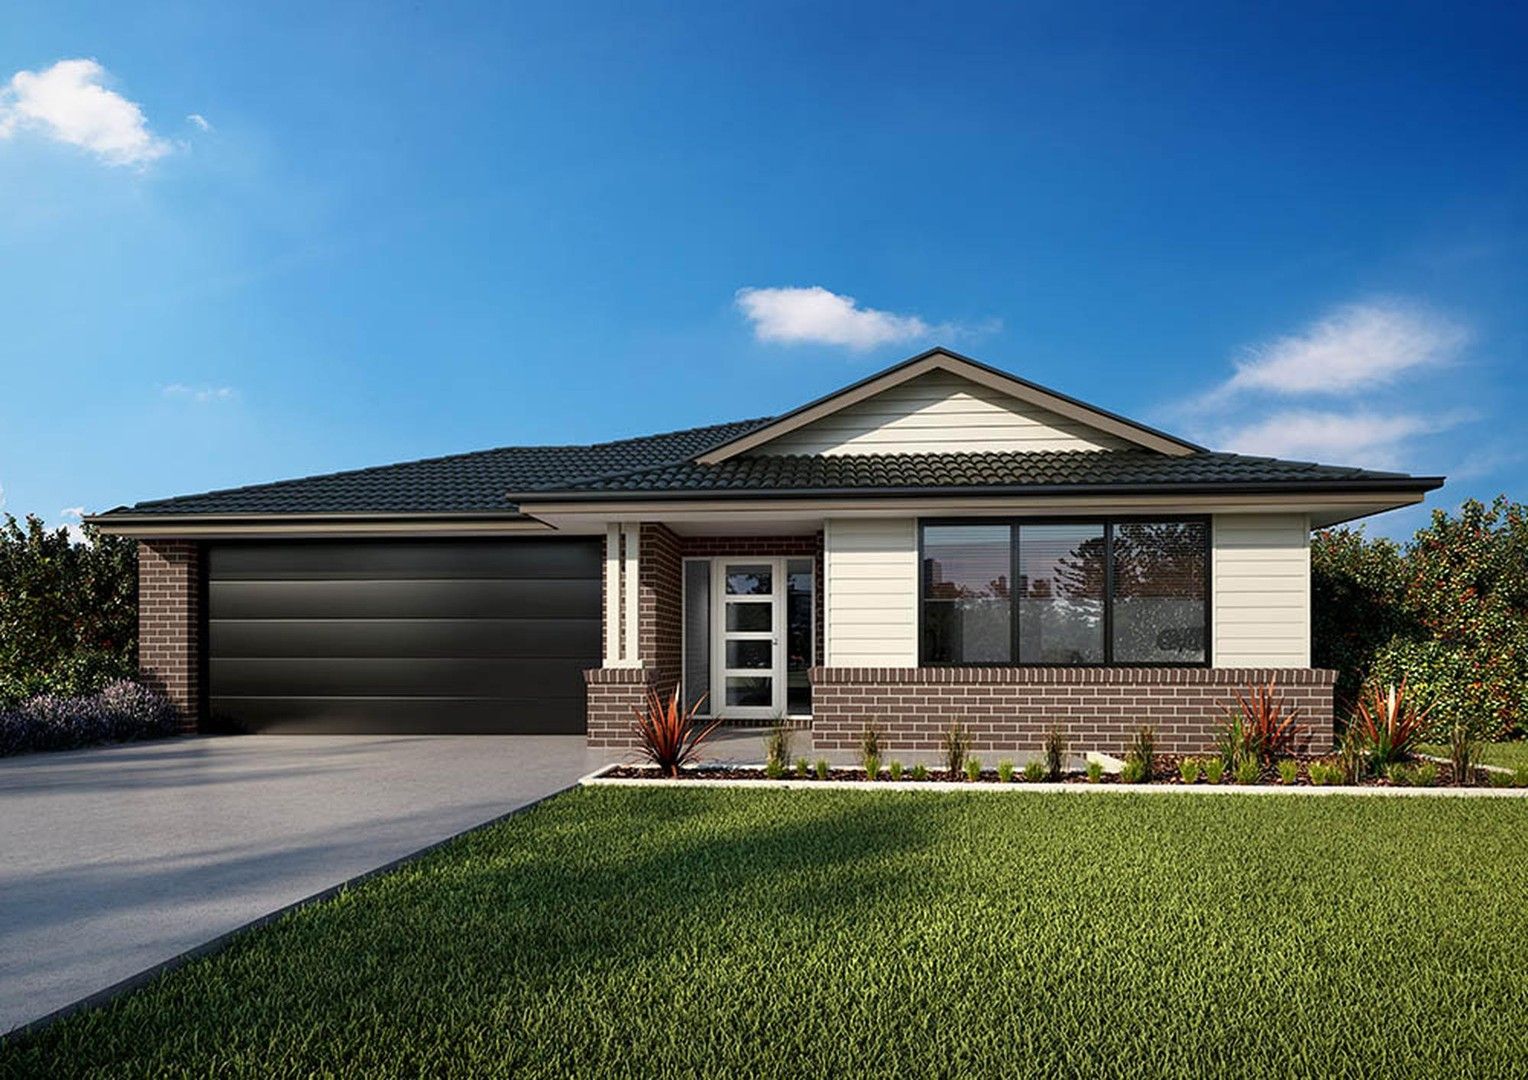 4 bedrooms New House & Land in 2419 Riverfield Square Estate CLYDE NORTH VIC, 3978